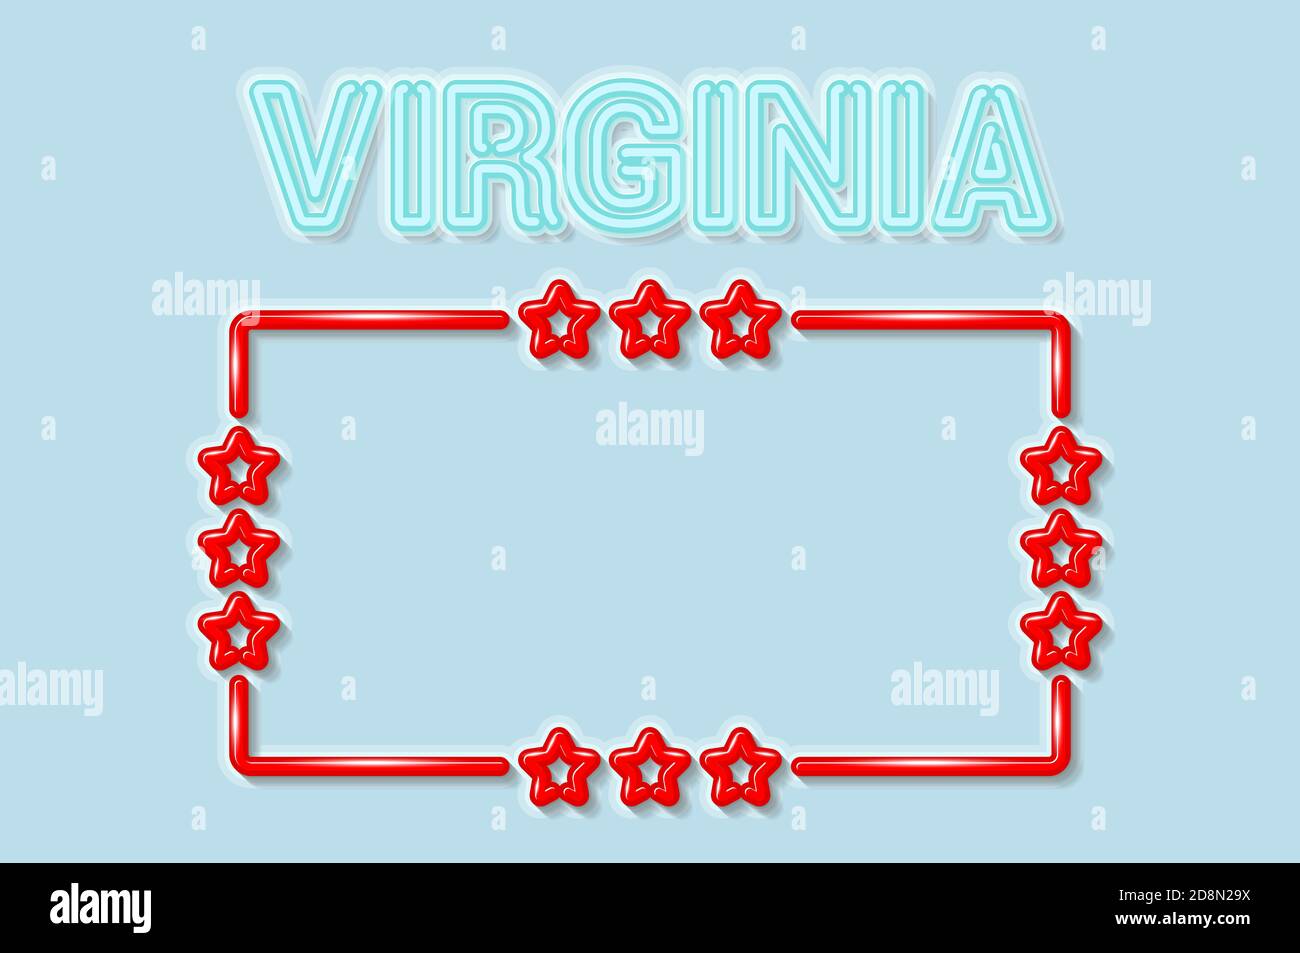 Virginia US state soft blue neon letters lights off. Glossy bold red frame with stars. Soft shadows. Light blue background. illustration. Stock Photo